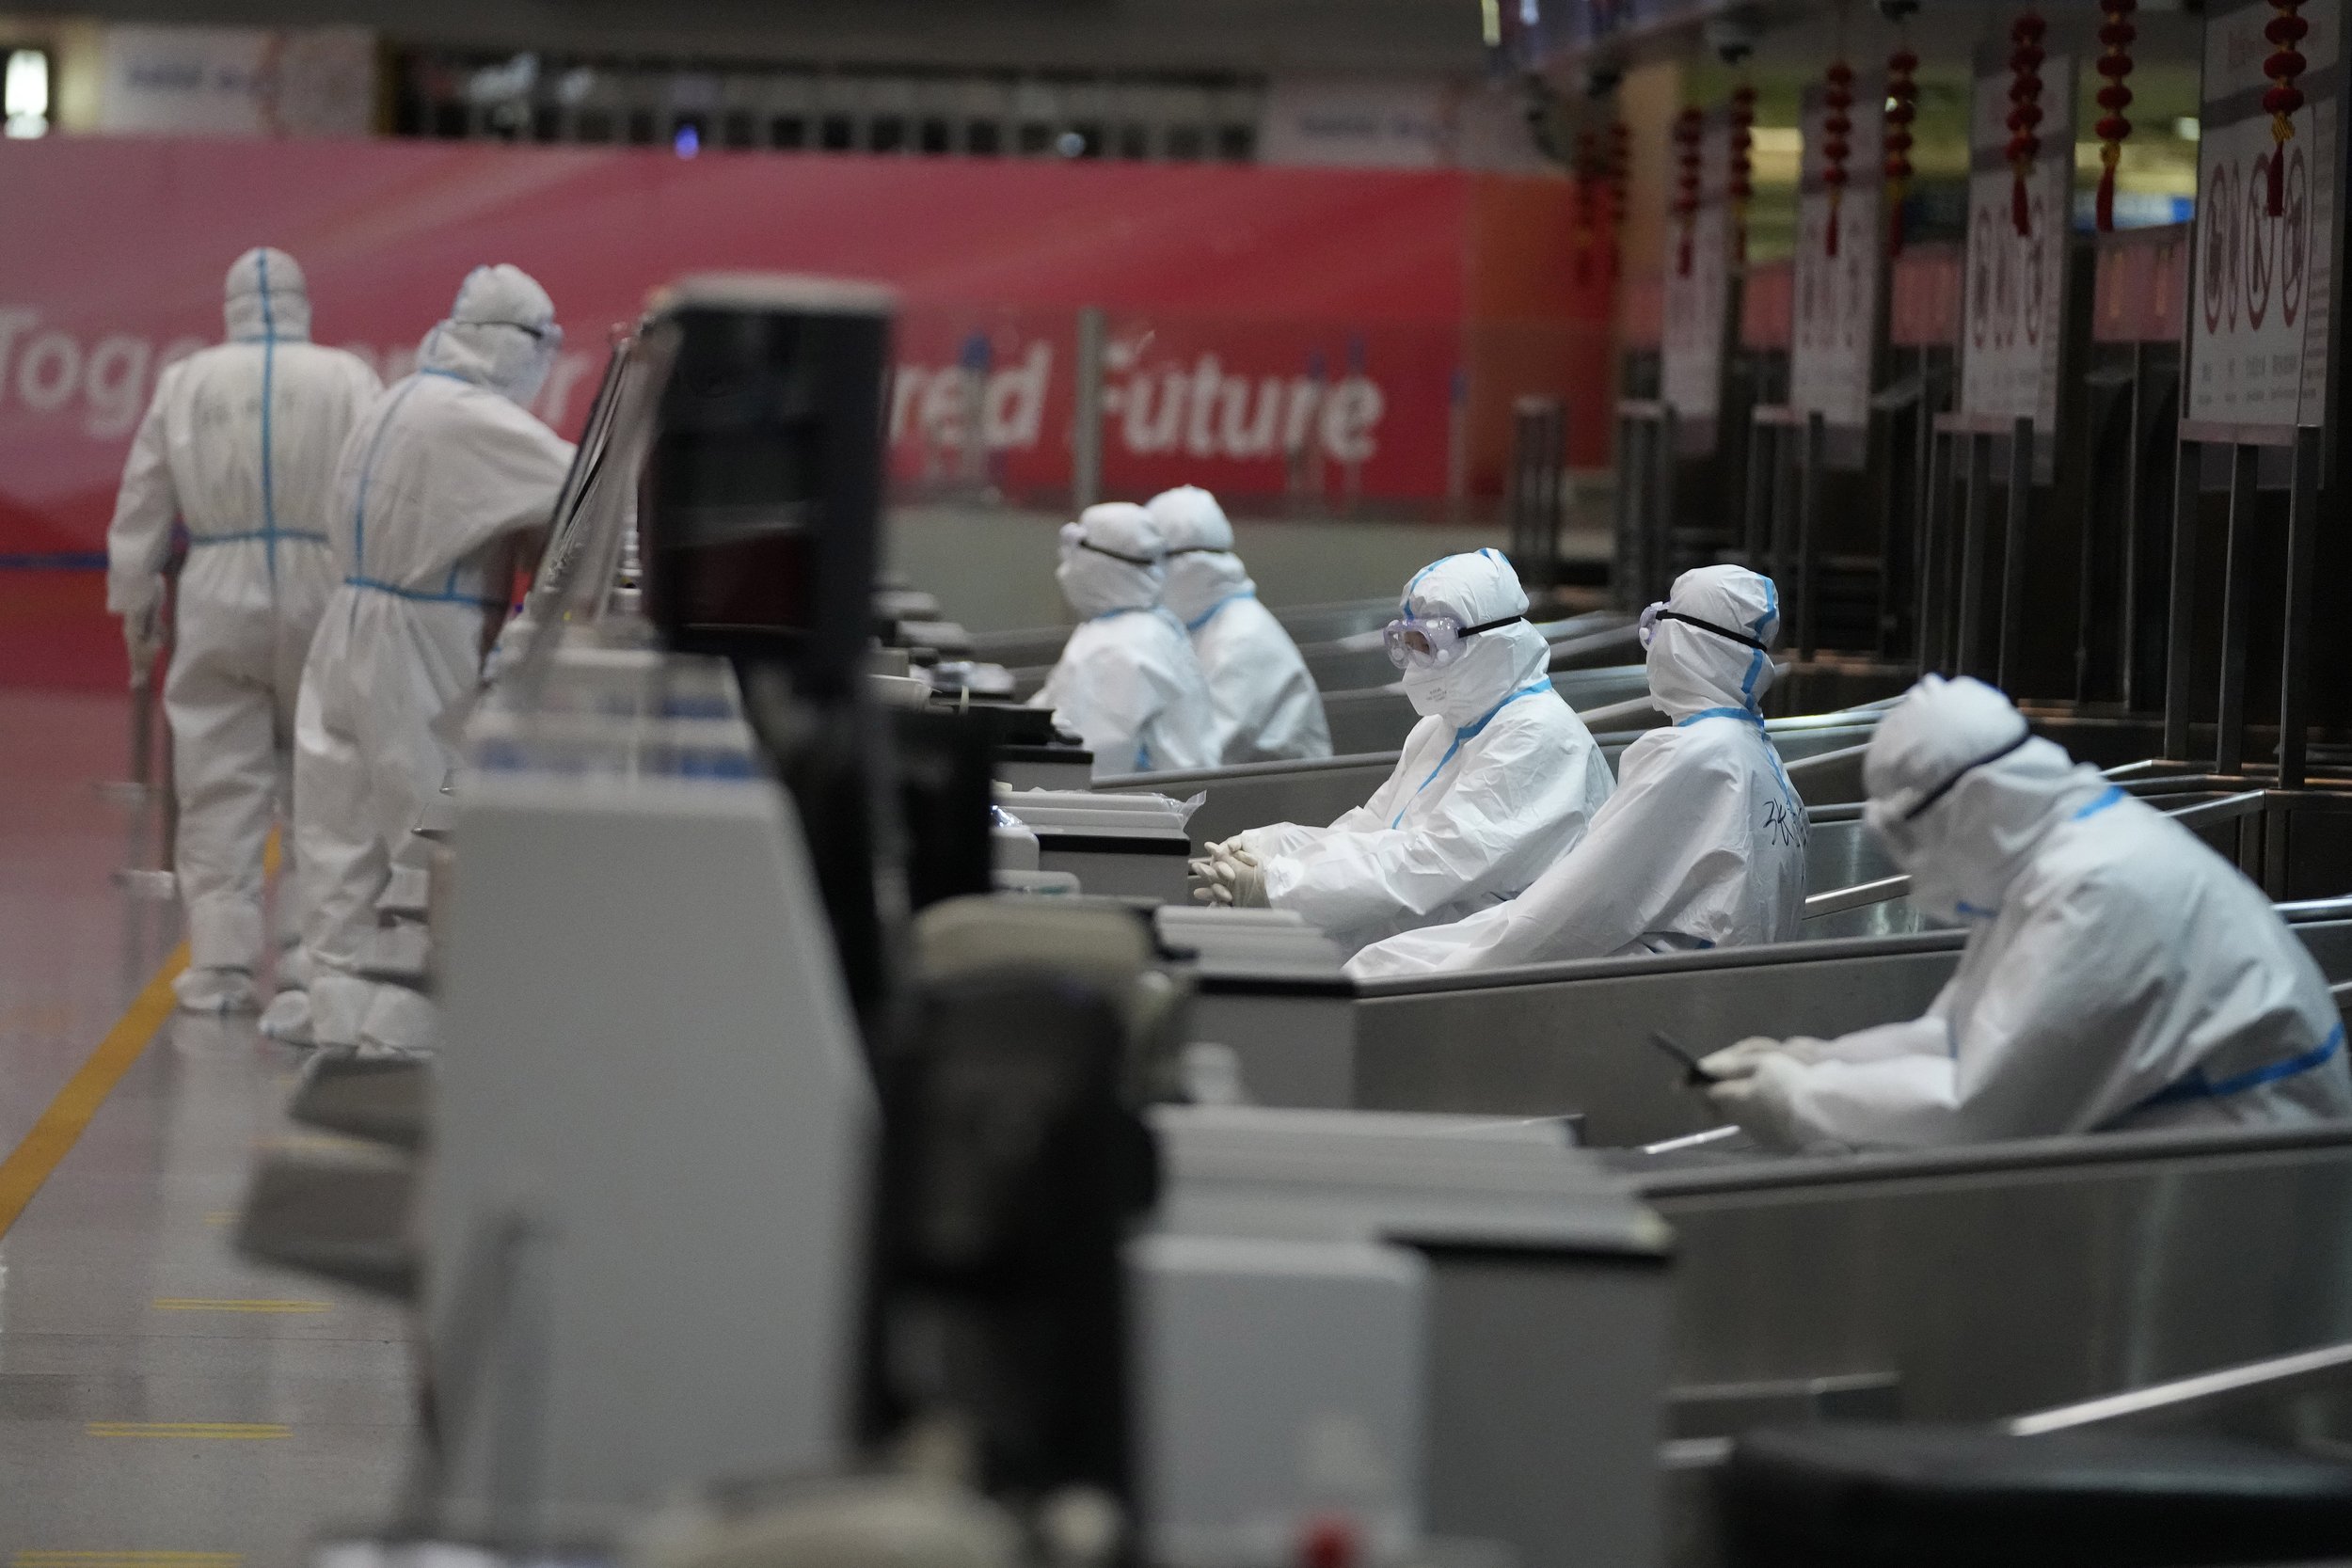  Olympic workers in protective clothing help travelers at the Beijing Capital International airport after the 2022 Winter Olympics, Monday, Feb. 21, 2022, in Beijing, China. (AP Photo/Frank Augstein) 